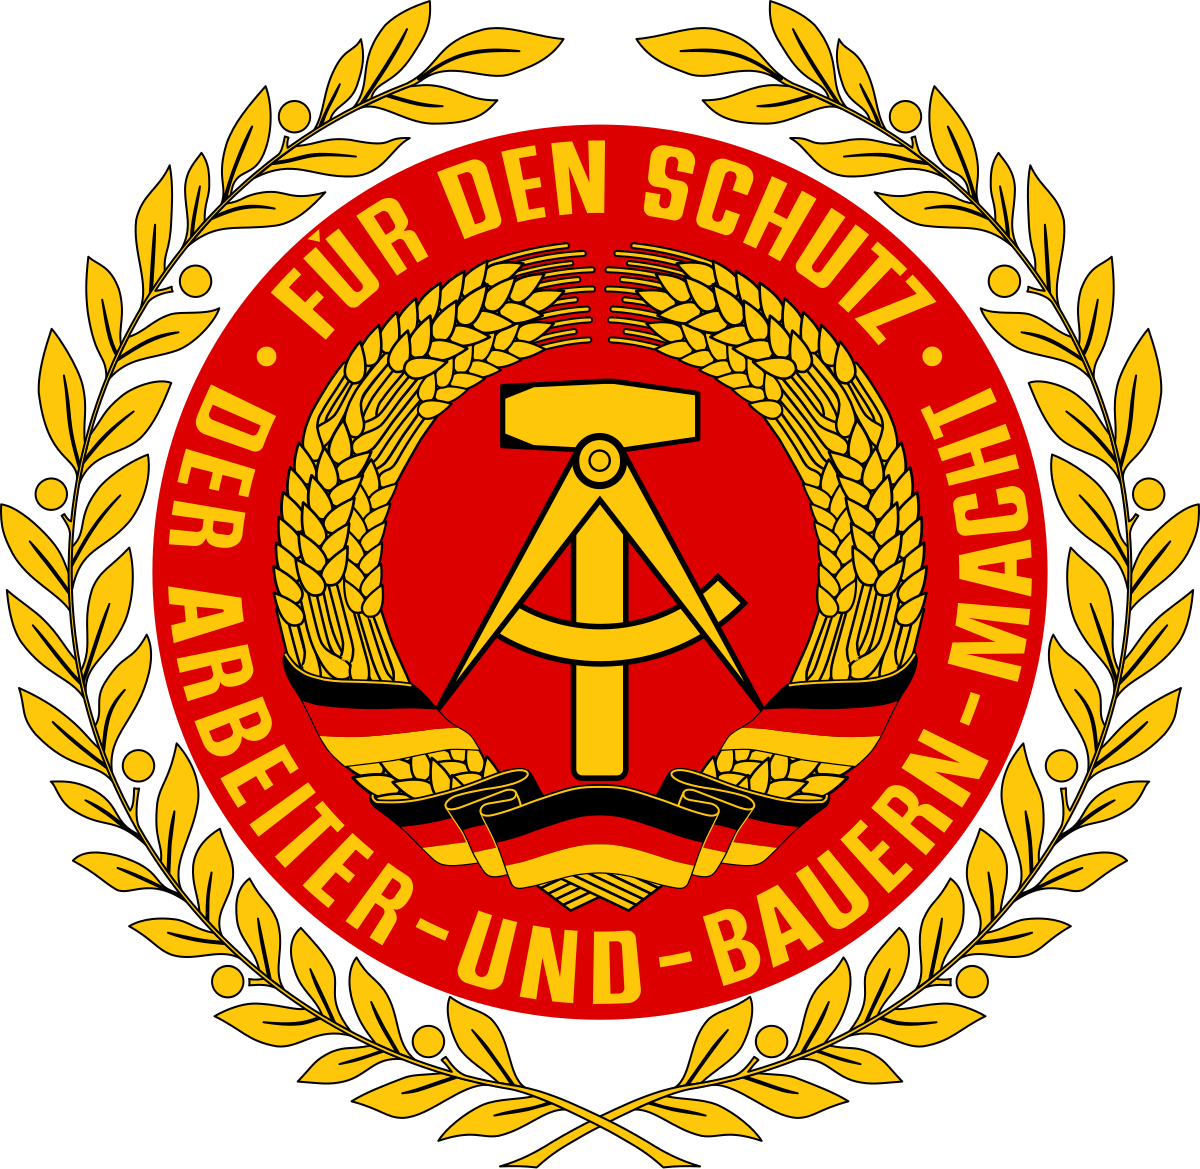 National People's Army - Wikipedia